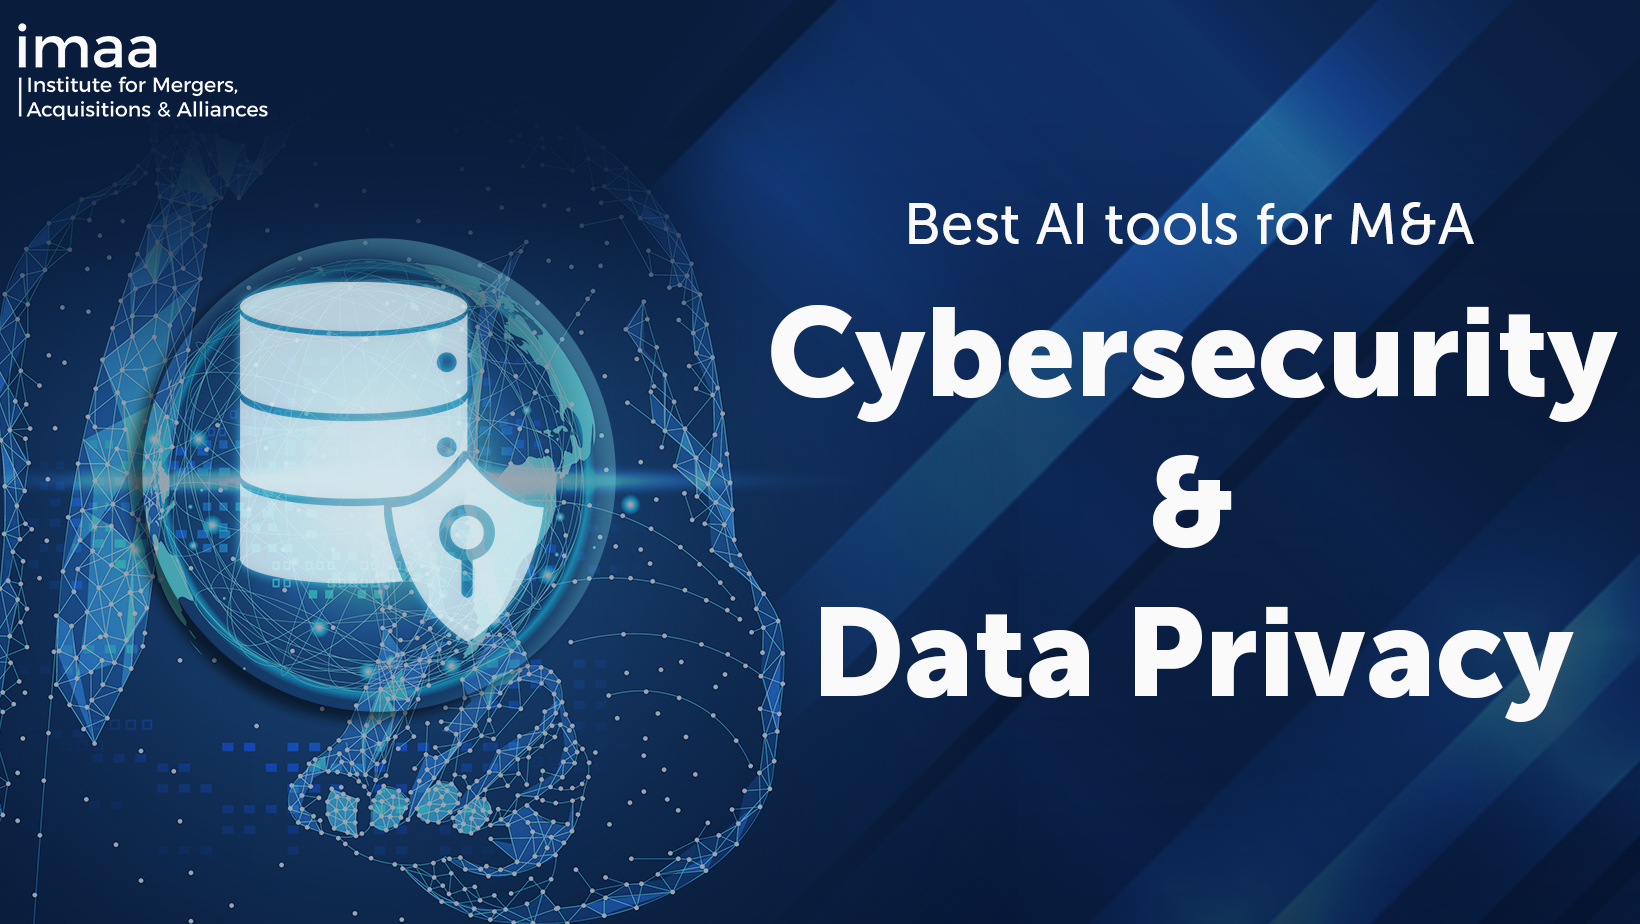 Best AI Tools in M&A Cybersecurity and Data Privacy